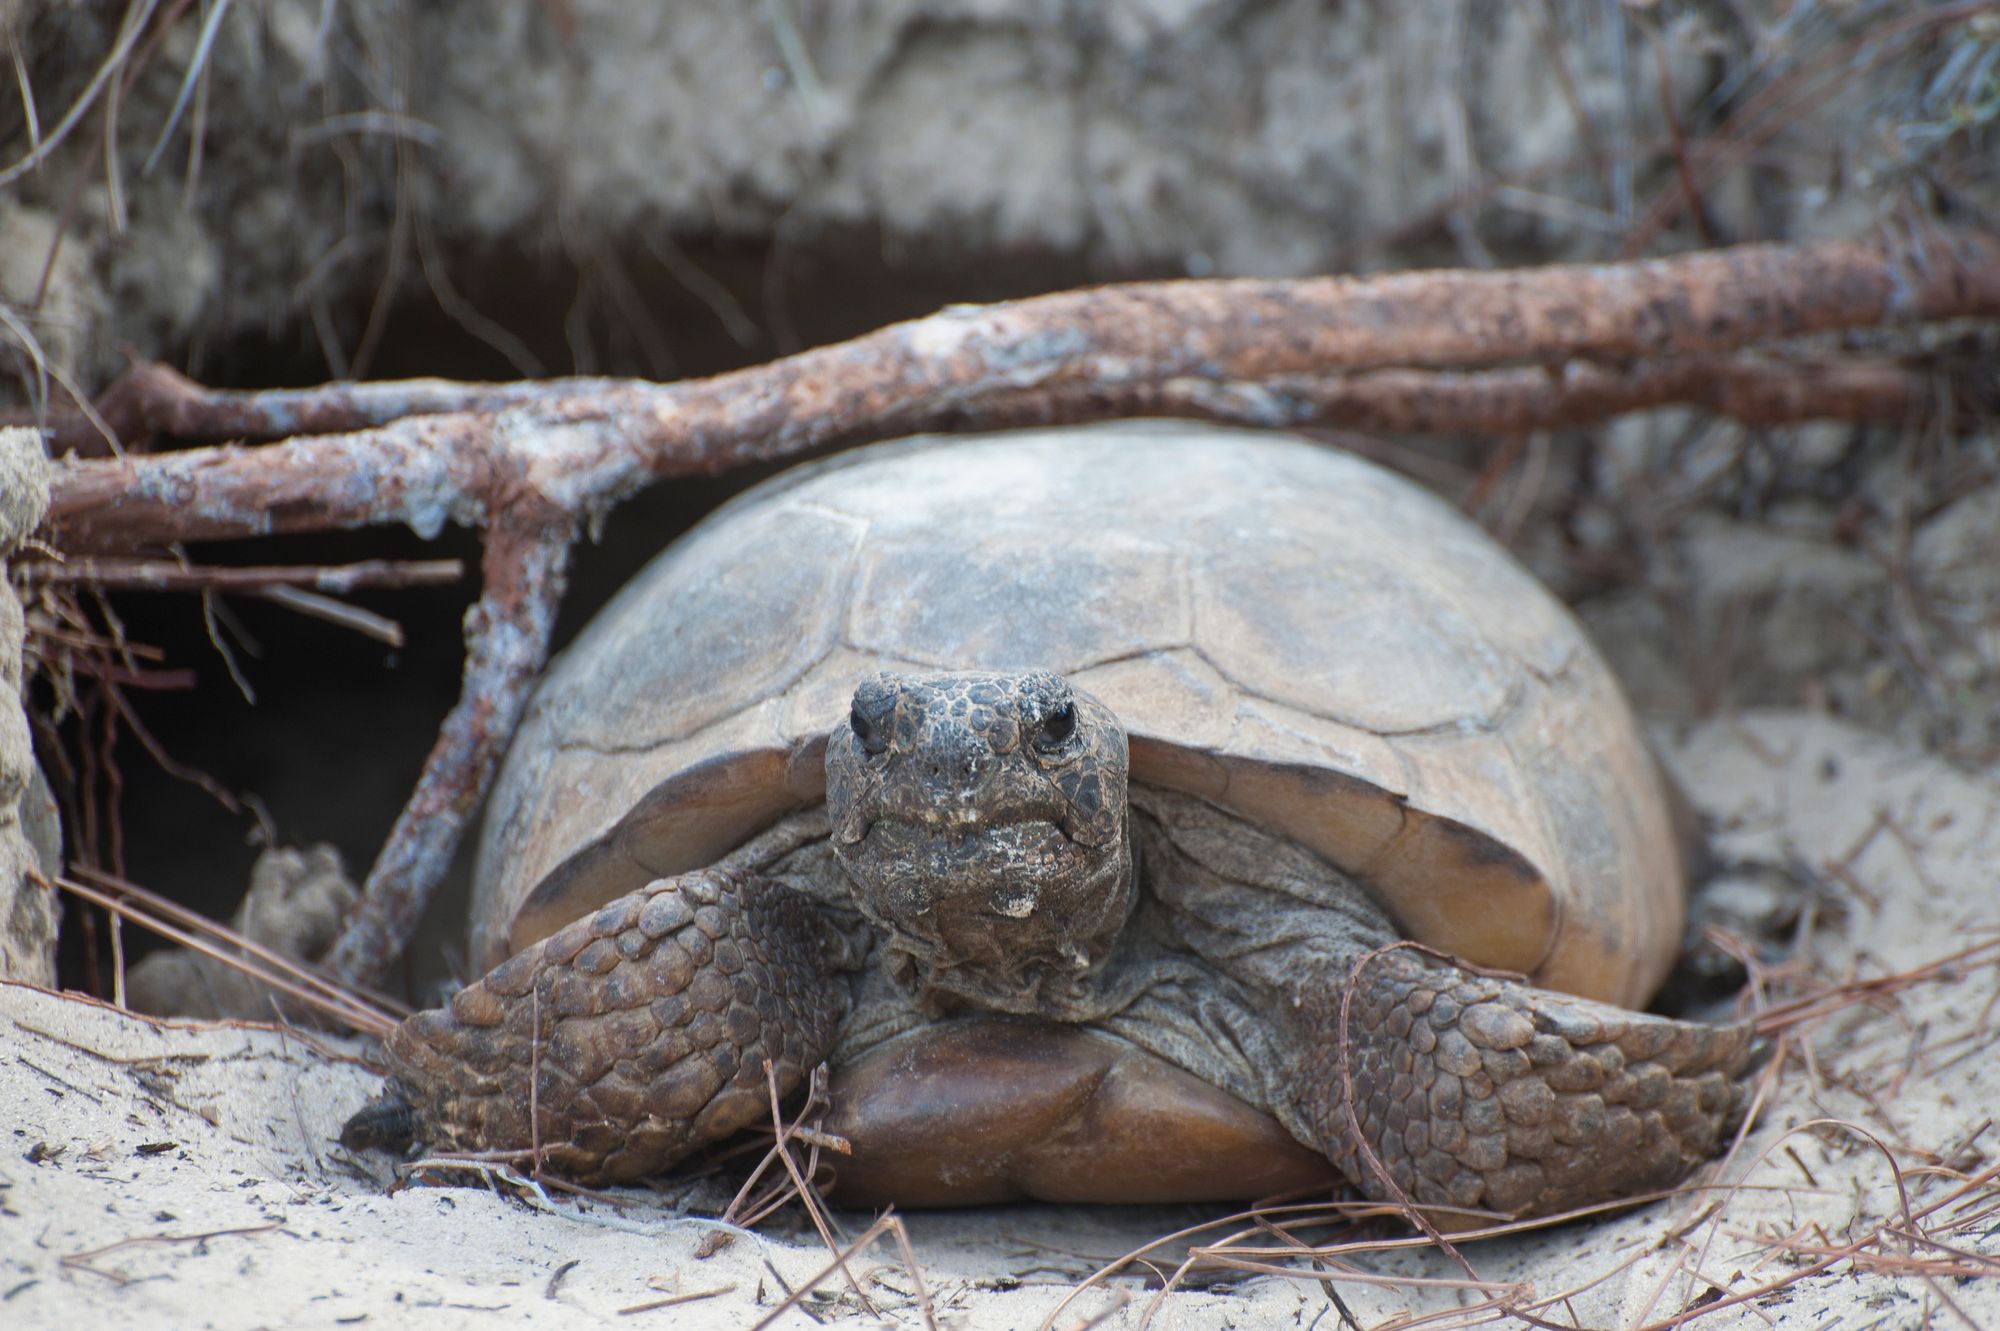 Gopher Tortoise Emerging from Burrow by vladeb, Flickr